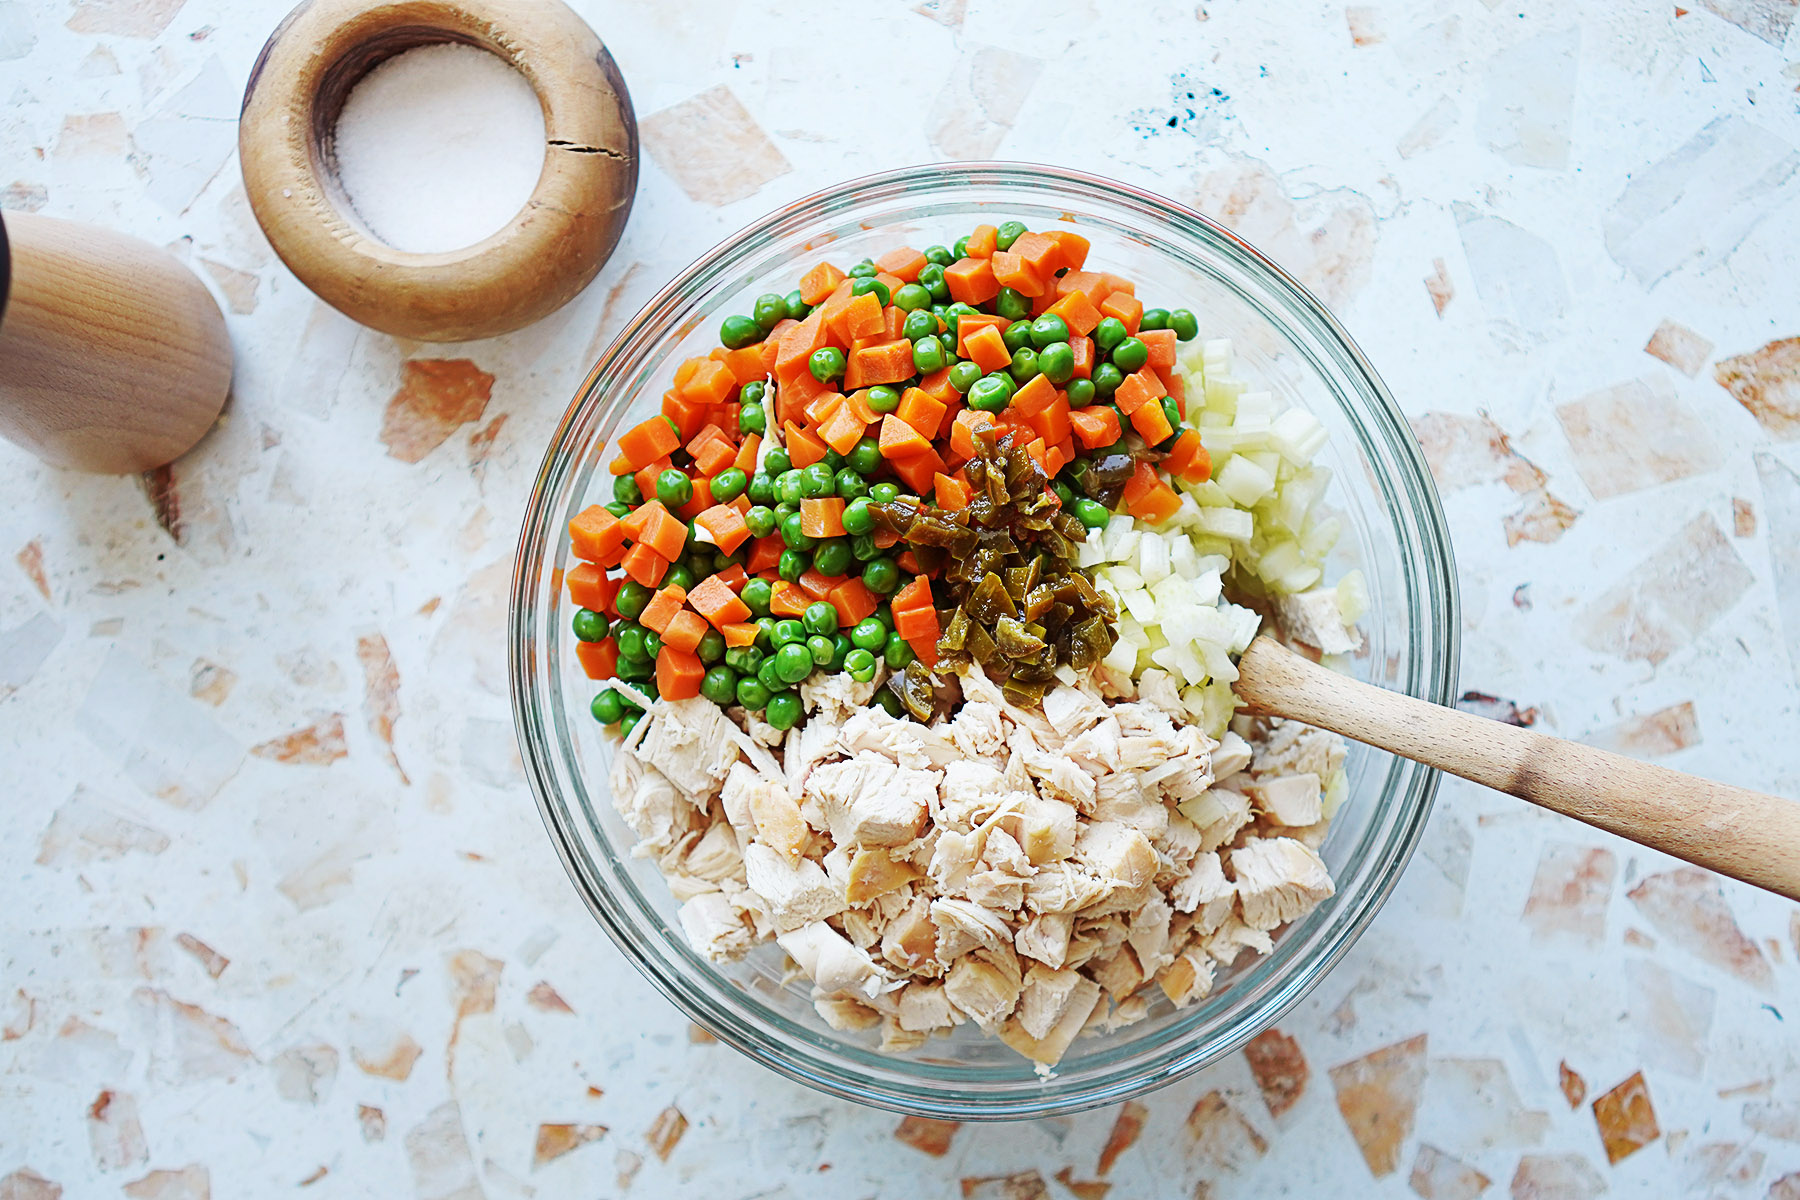 A bowl with cubed chicken, carrots & peas, and celery